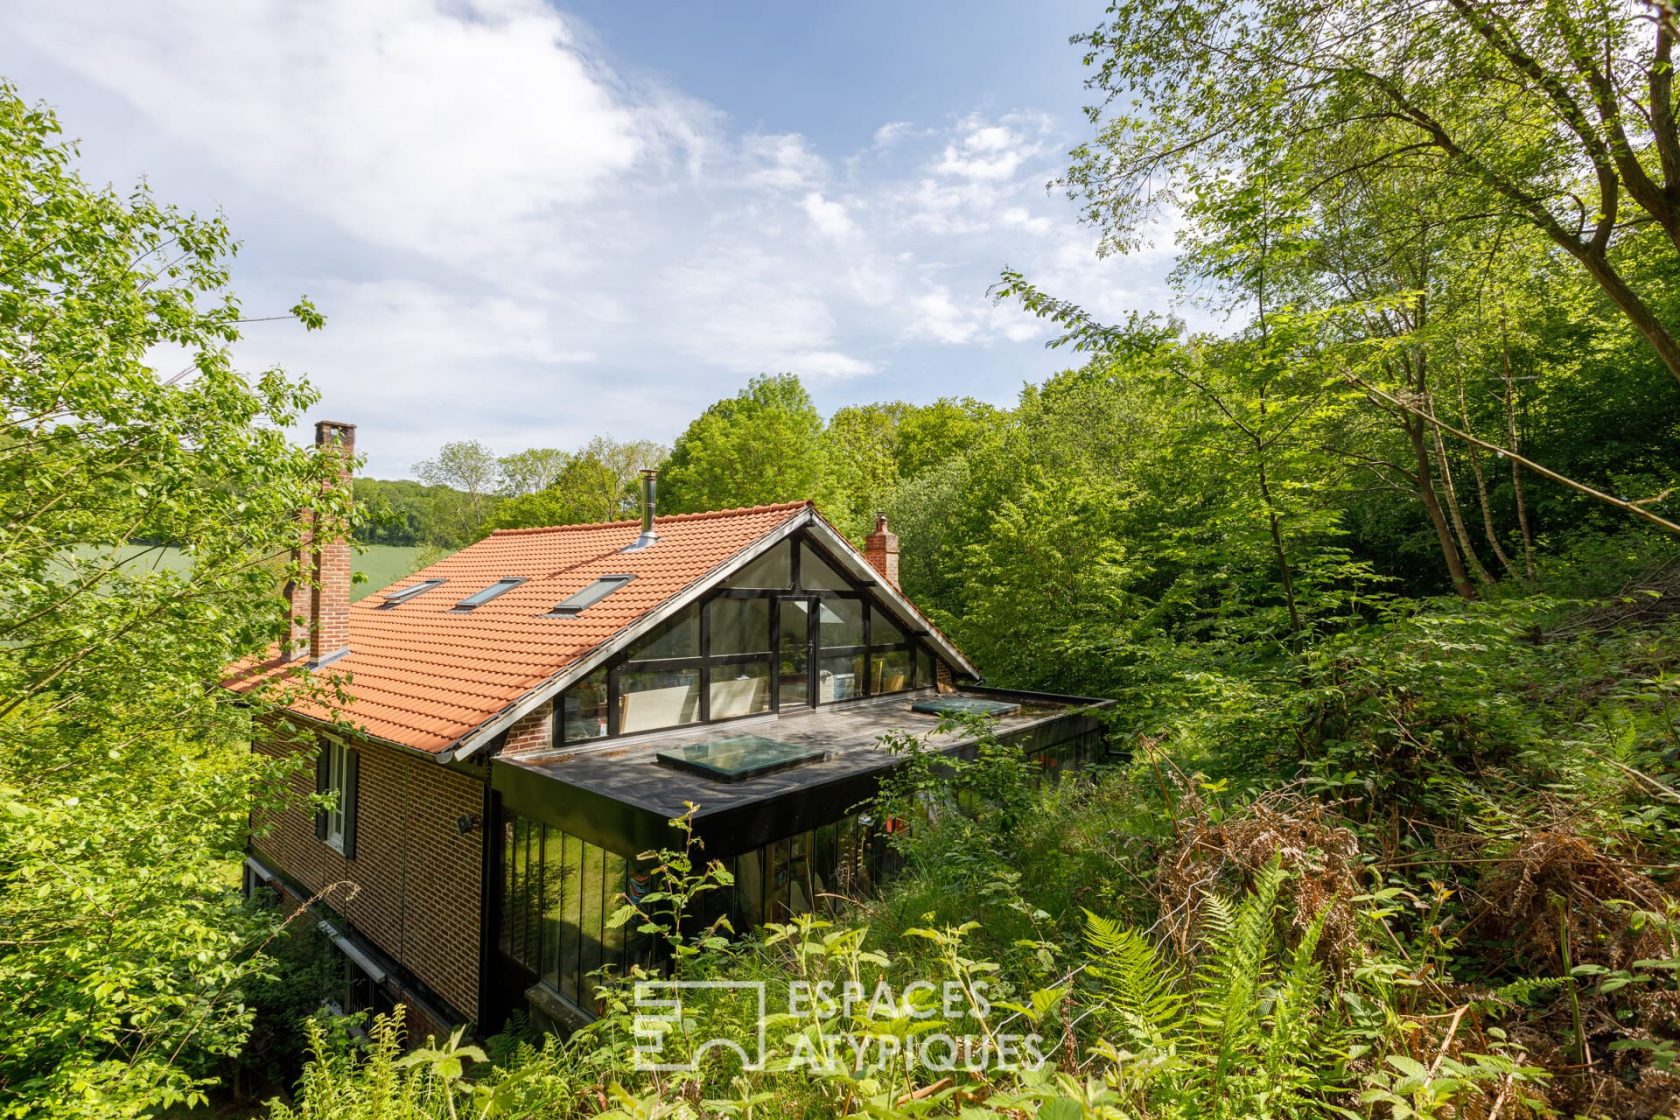 La Forestière – Former hunting lodge revisited and its forest west of Amiens